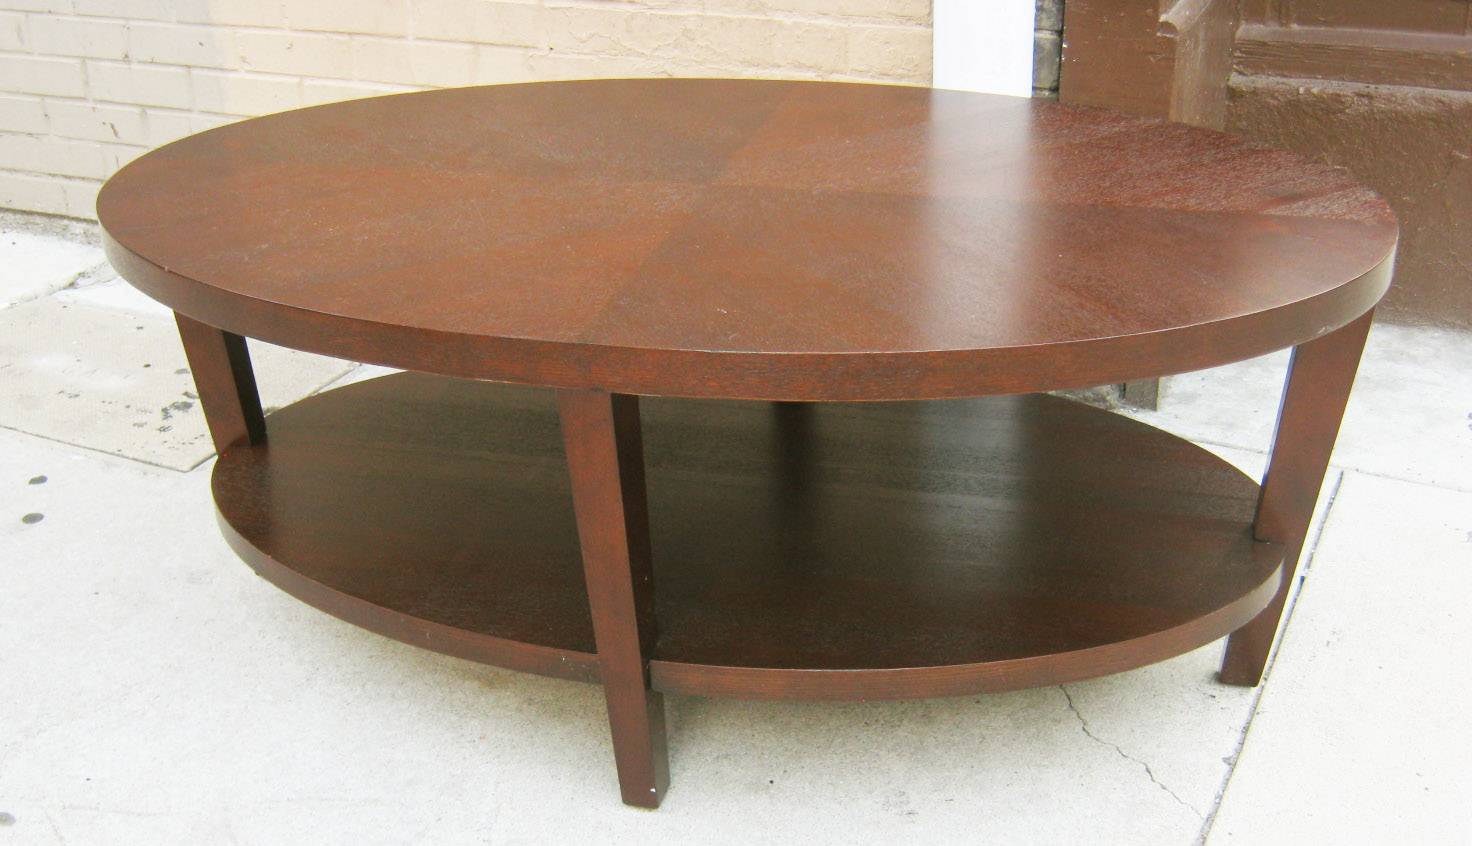 Uhuru Furniture Collectibles Oval Espresso Coffee Table Sold with regard to sizing 1472 X 846